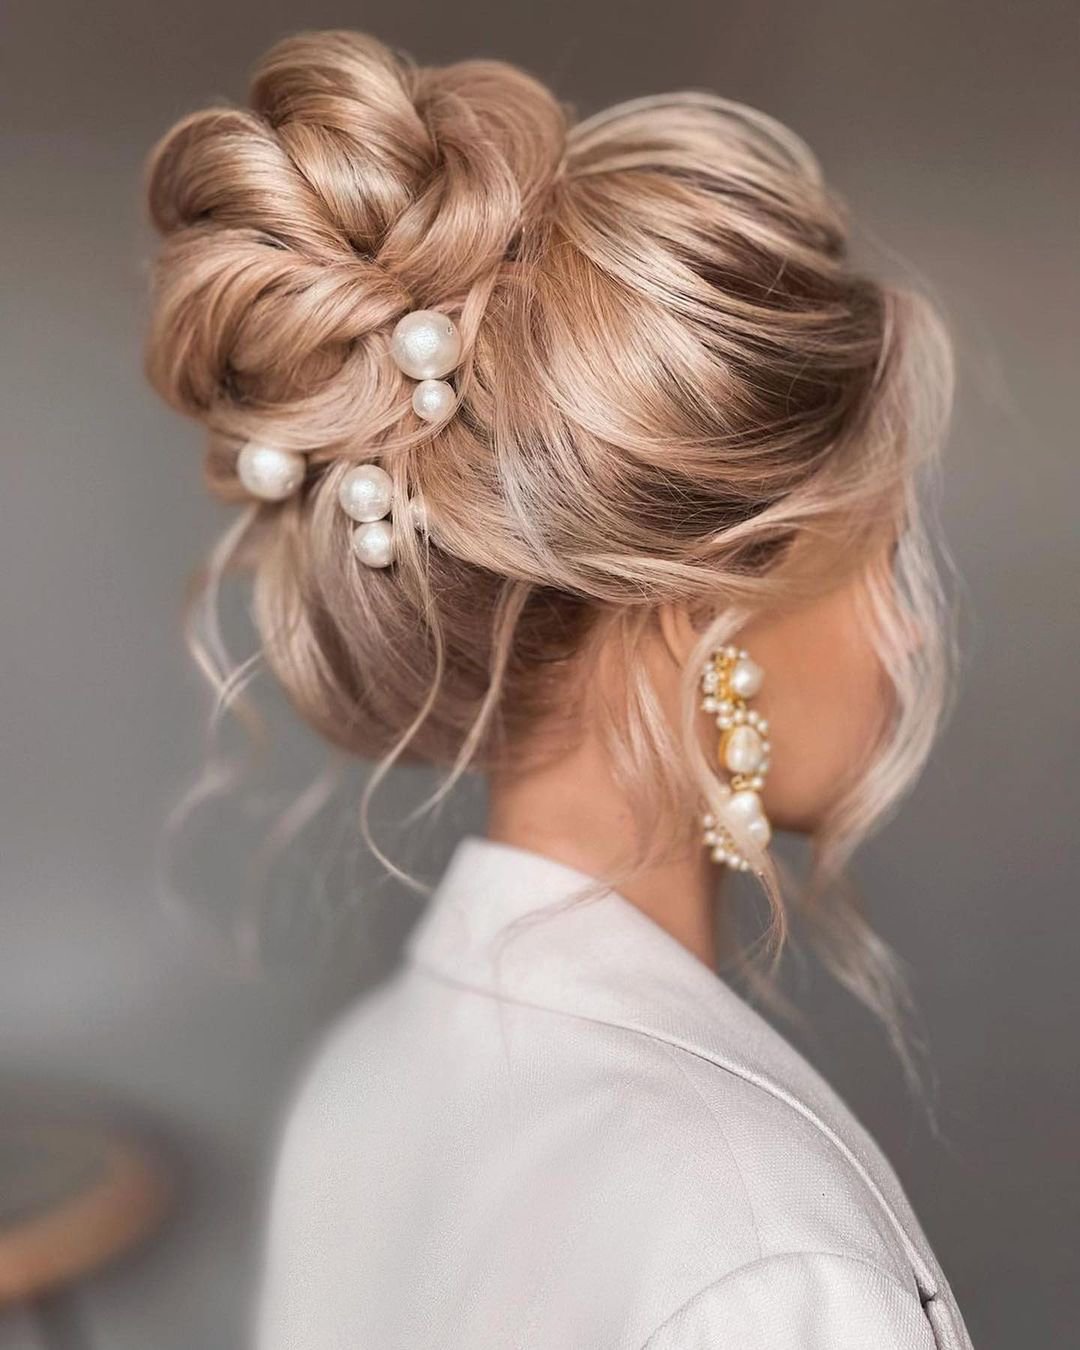 wedding hairstyles for curly hair high bun with pearls kasia_fortuna